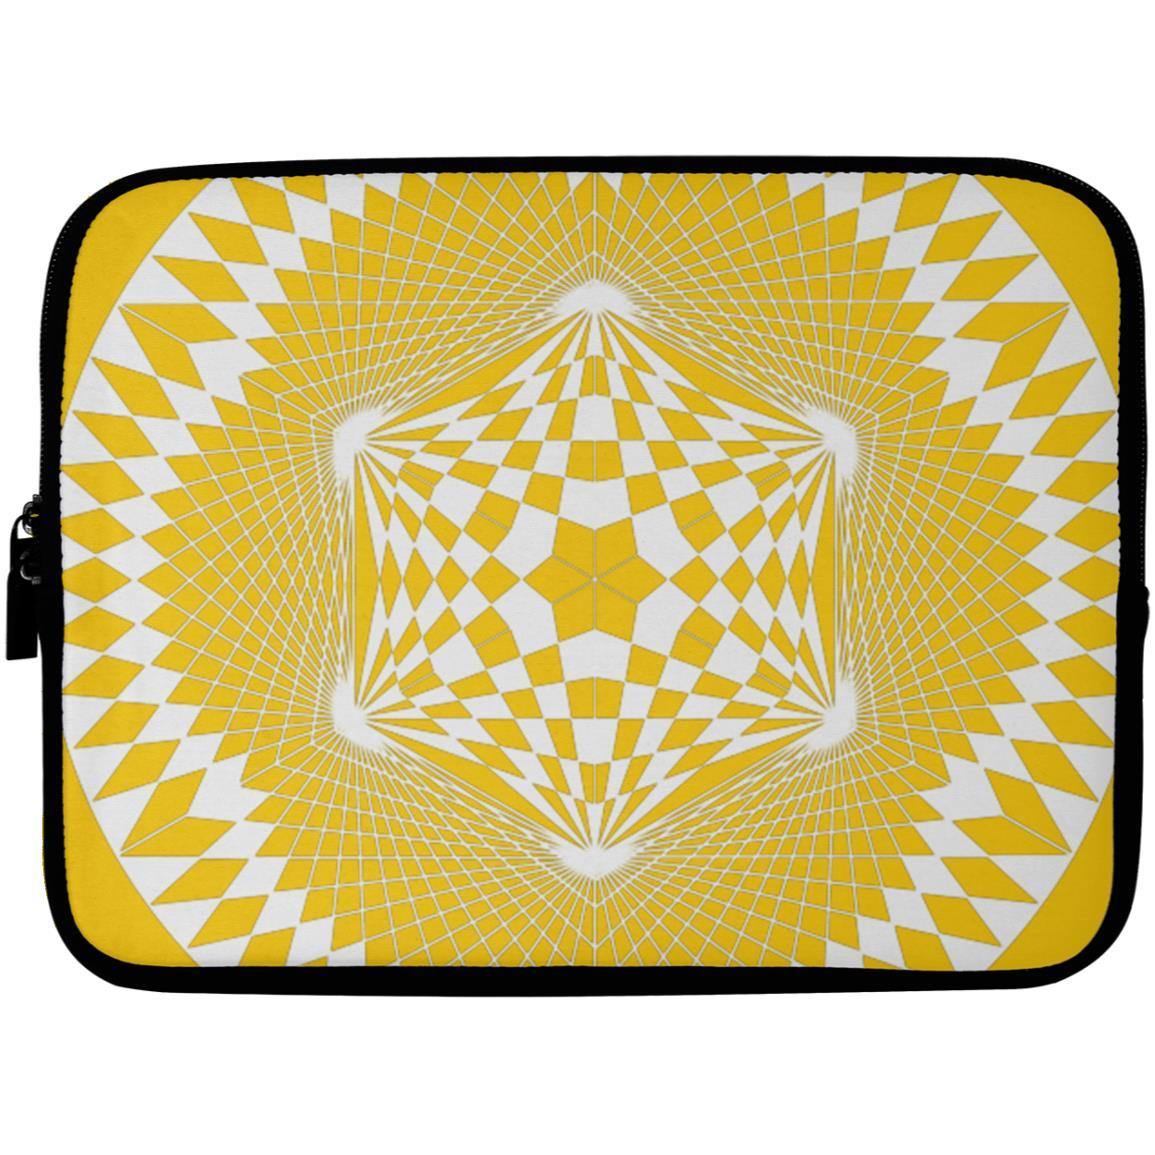 Crop Circle Laptop Sleeve - Windmill Hill 4 - Shapes of Wisdom